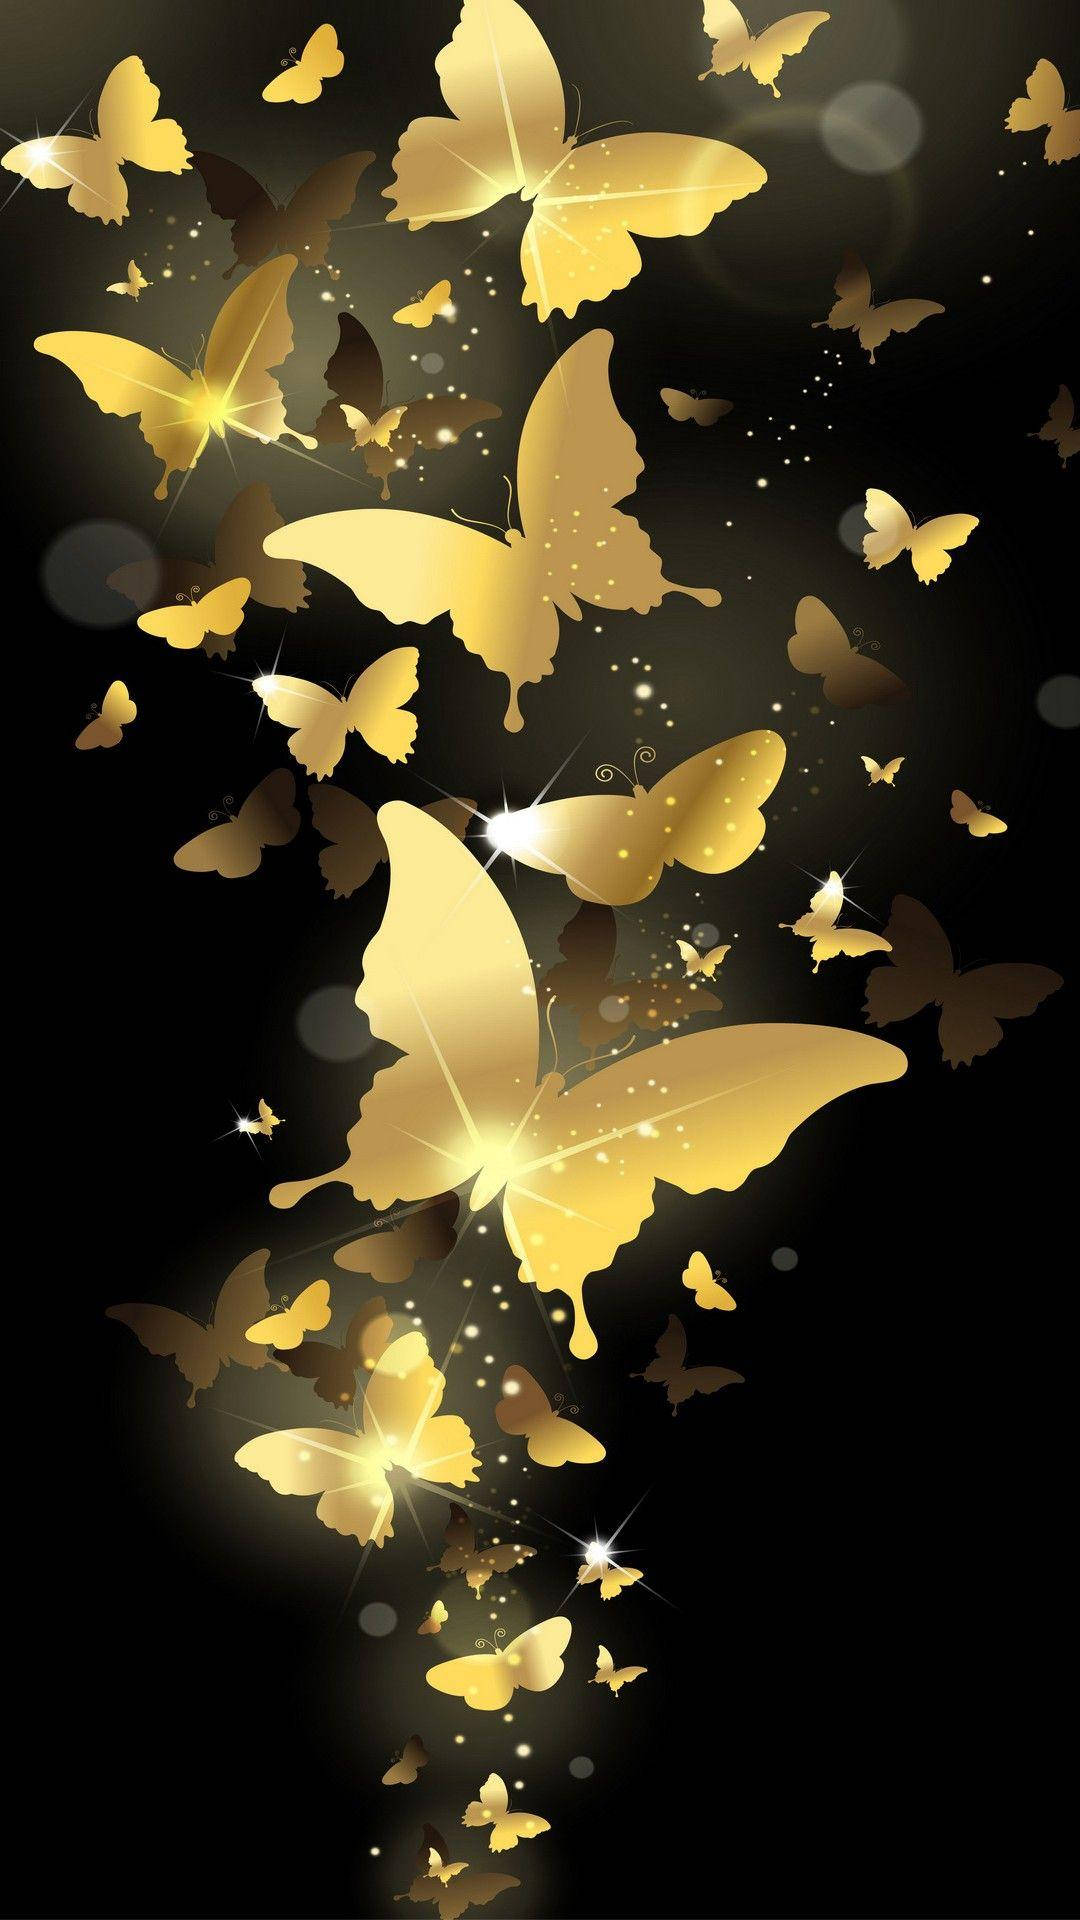 yellow butterfly backgrounds